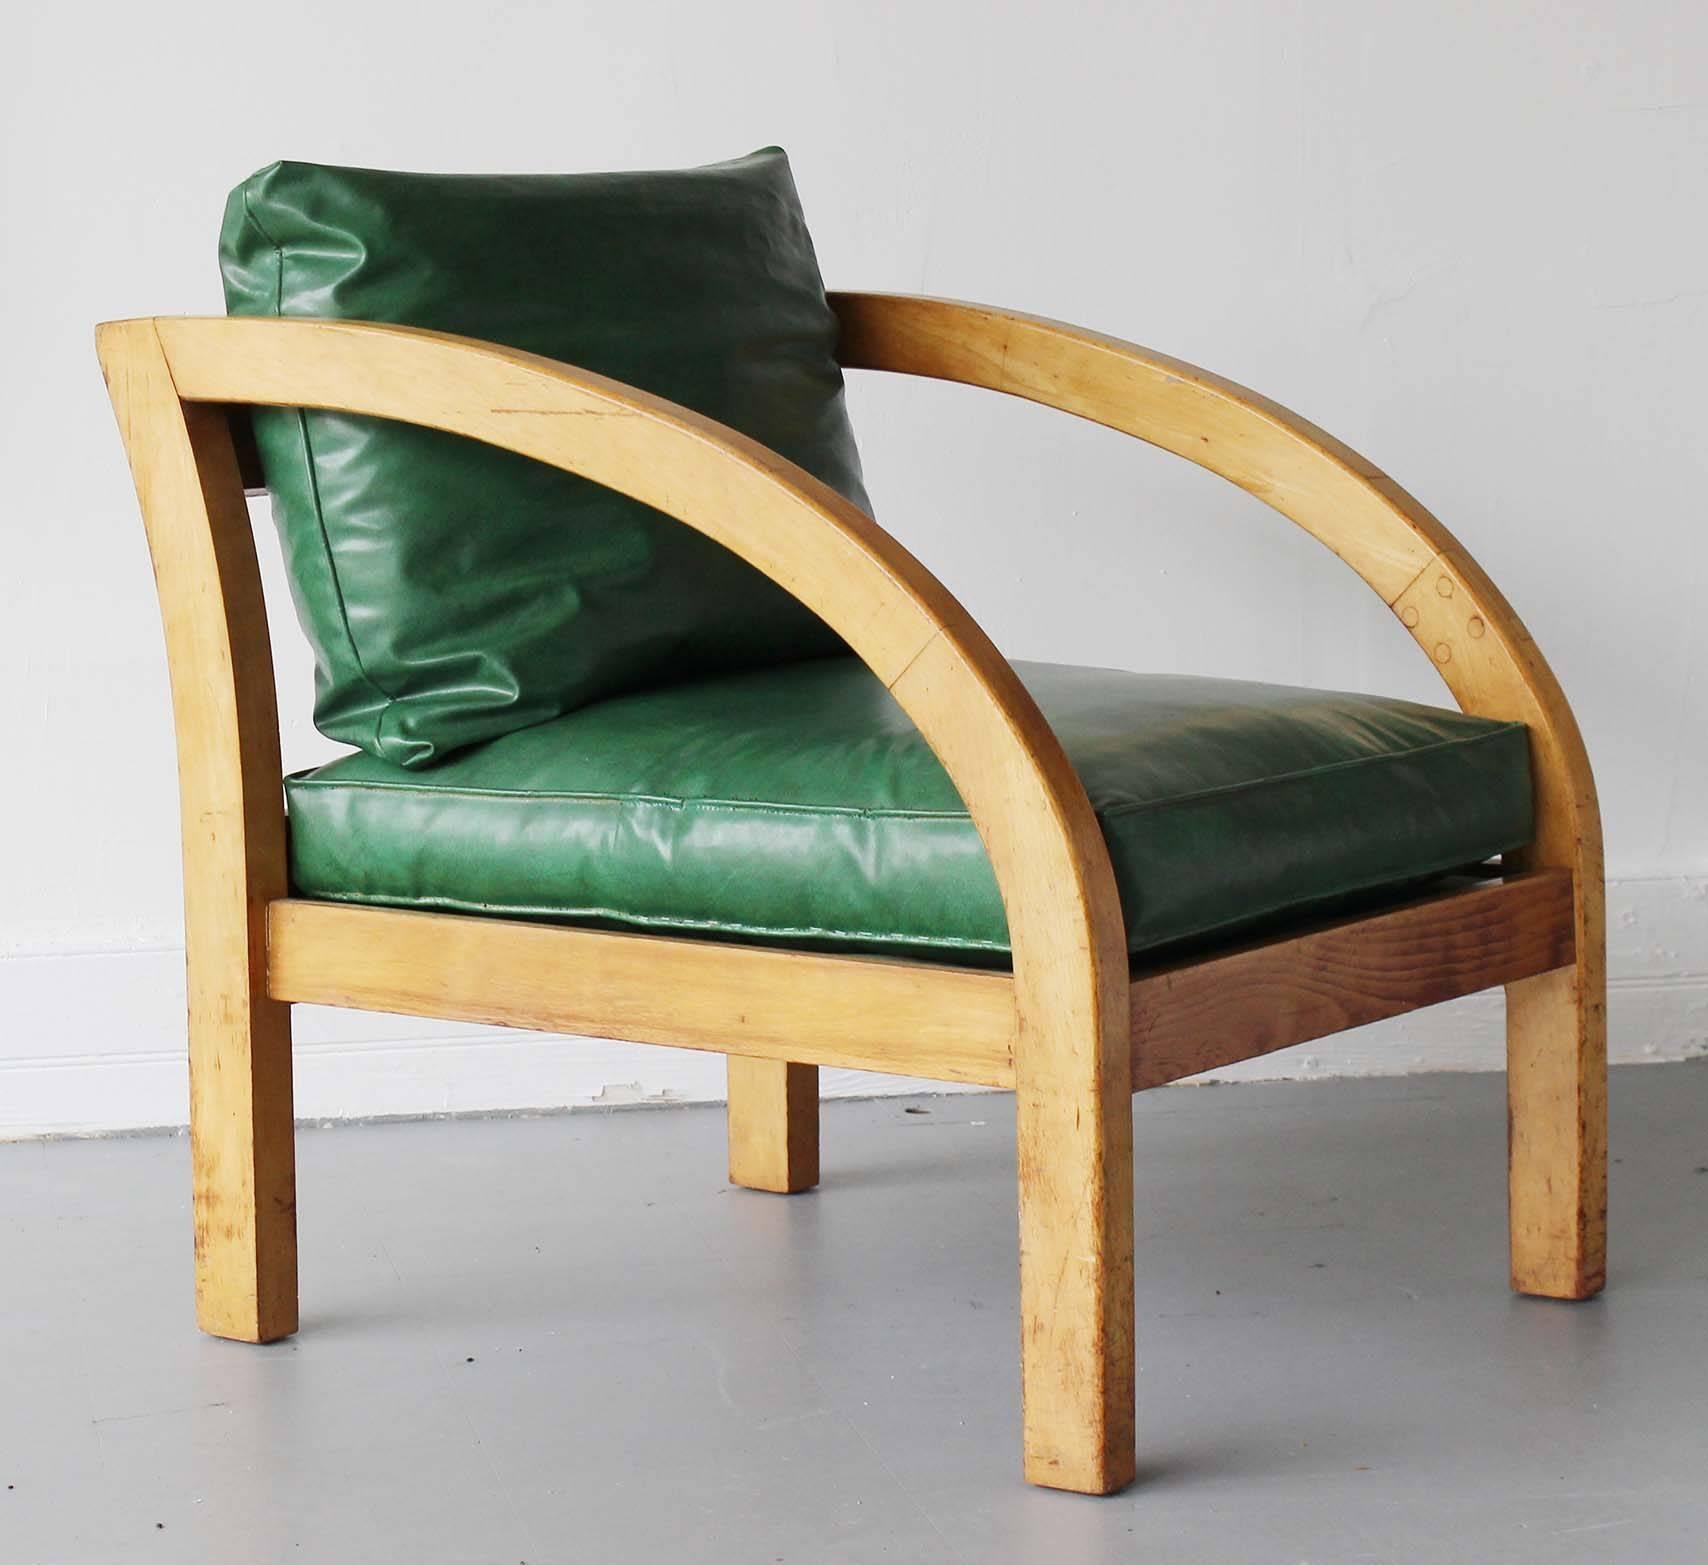 A Mid-Century deco Modernage D lounge chair in original upholstery, in the style of Paul Frankl.

Frame height 26.63 inches.